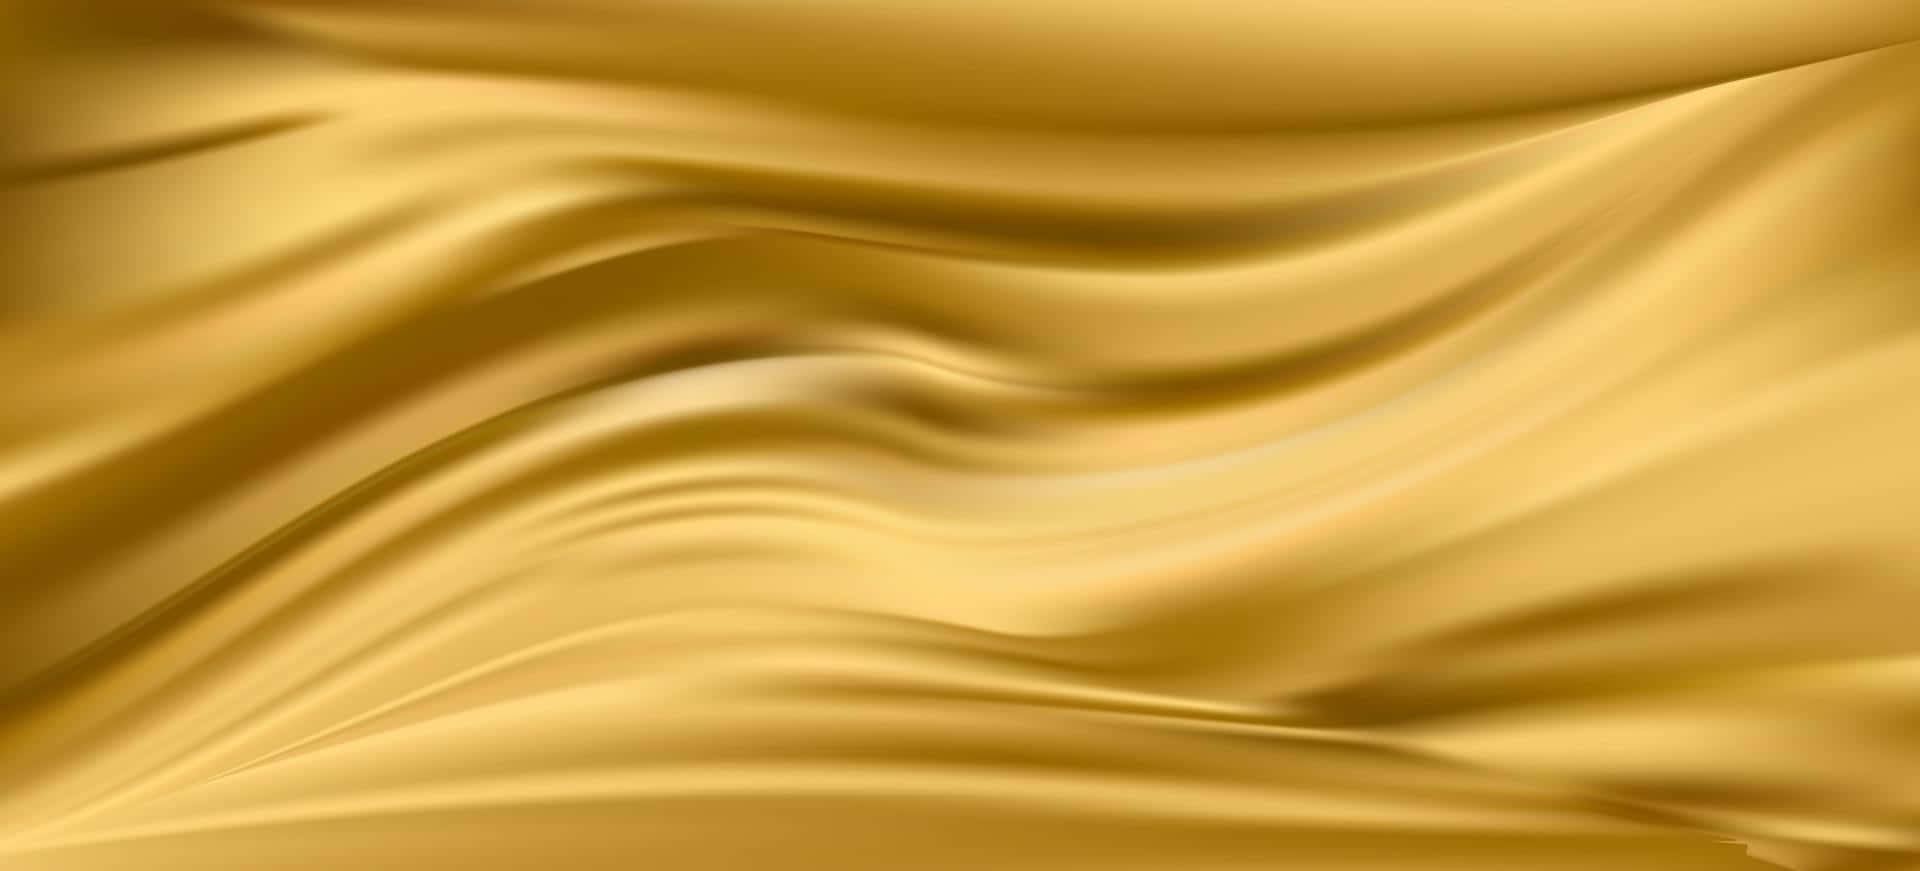 A Golden Silk Background With Waves Wallpaper